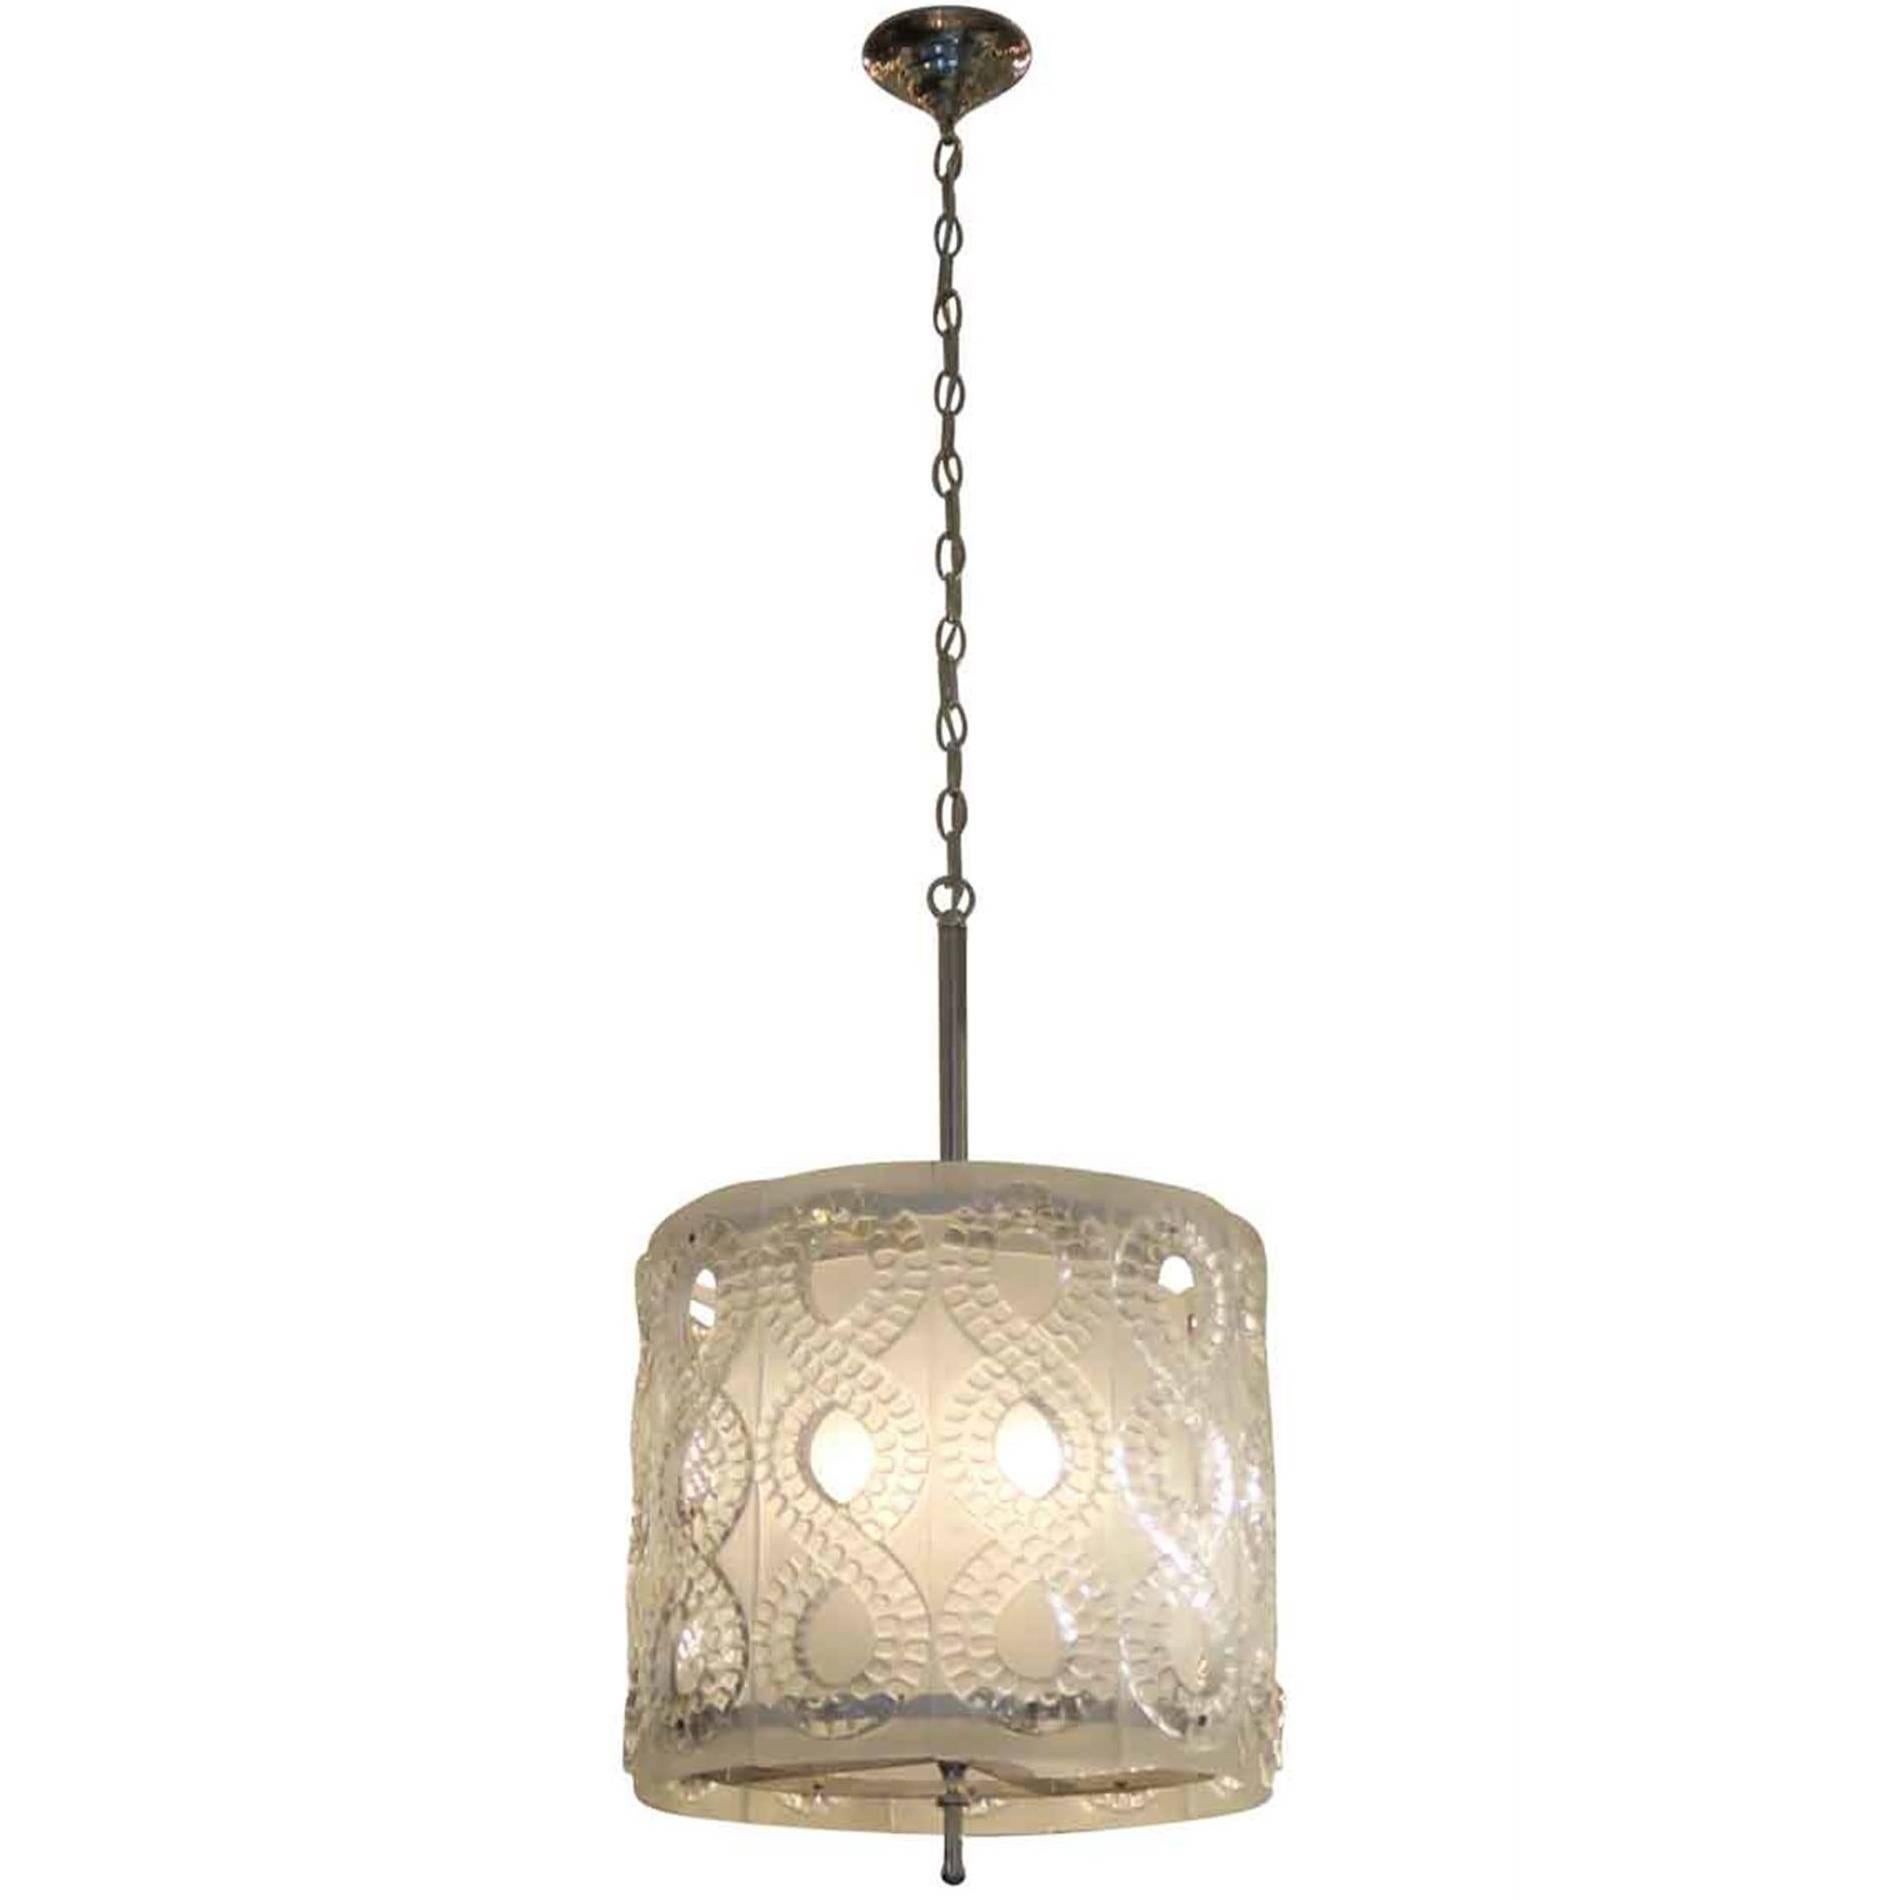 1990s Mid-Century Modern Crystal Pendant Light Done in a Lalique "Seville" Style